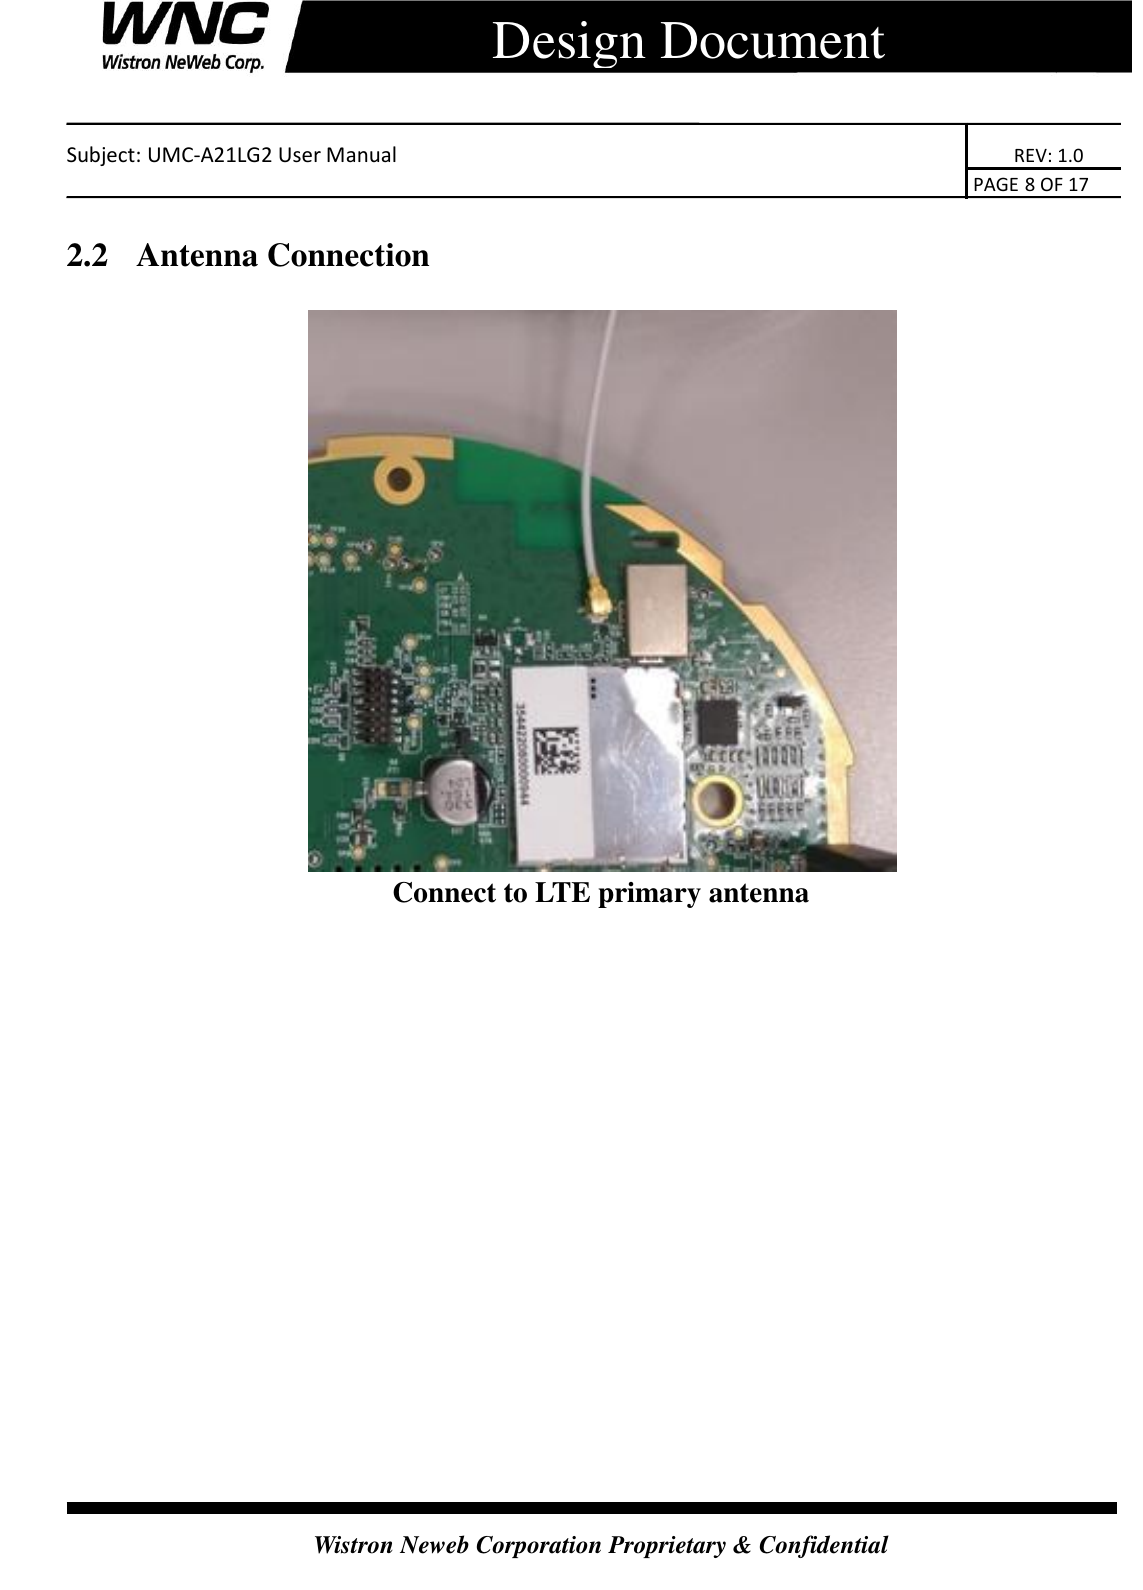    Subject: UMC-A21LG2 User Manual                                                                      REV: 1.0                                                                                        PAGE 8 OF 17  Wistron Neweb Corporation Proprietary &amp; Confidential      Design Document 2.2   Antenna Connection  Connect to LTE primary antenna    